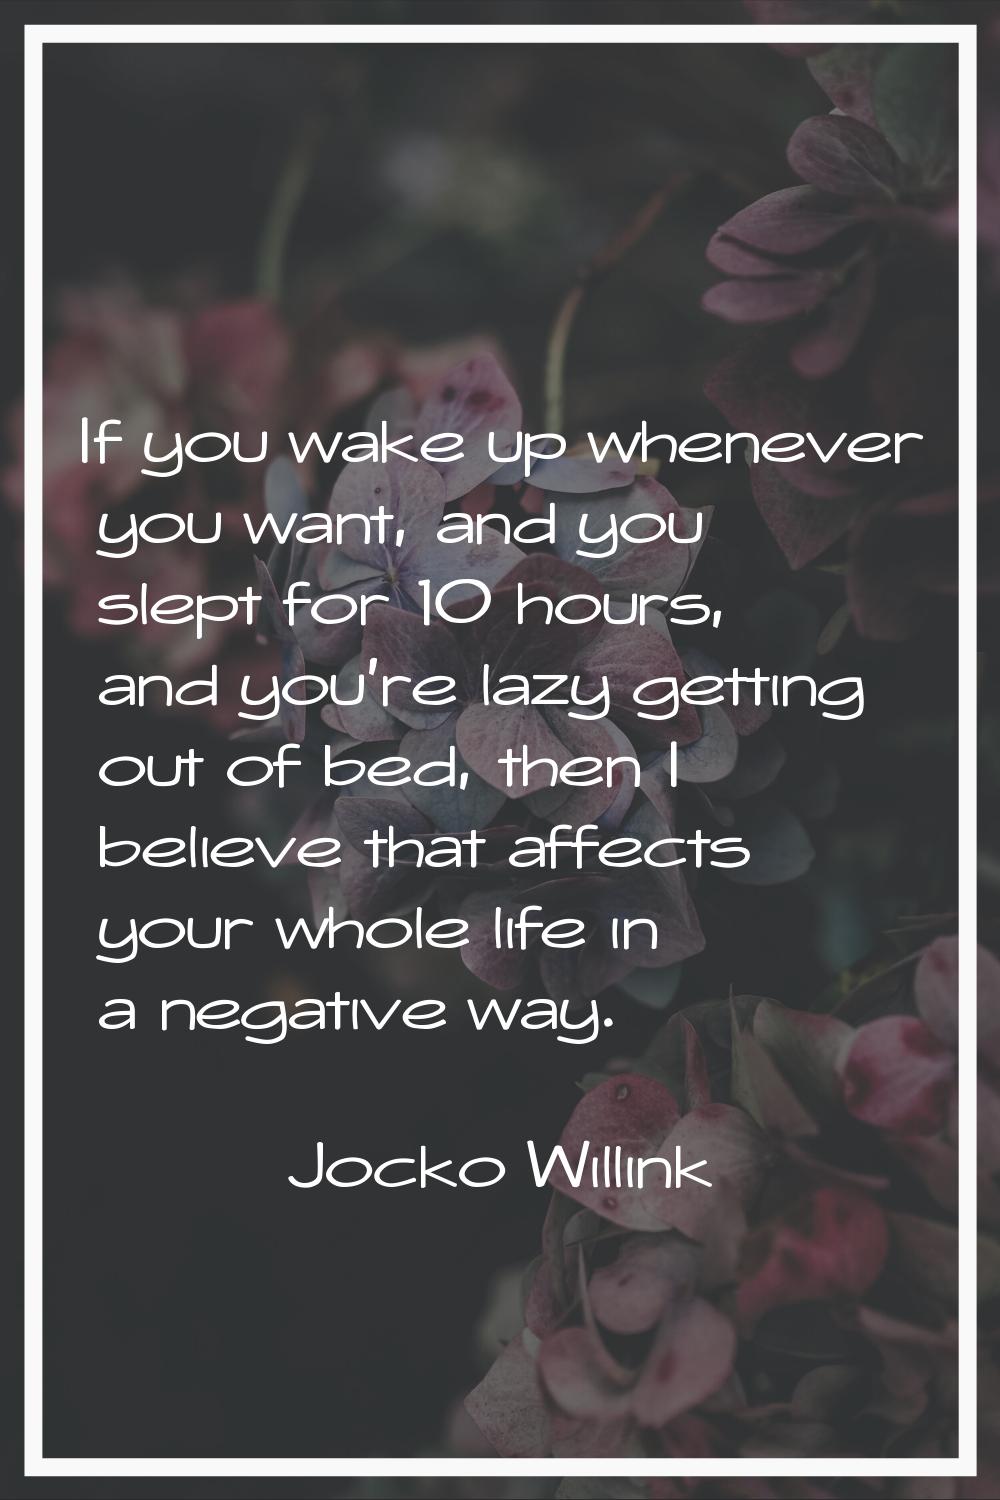 If you wake up whenever you want, and you slept for 10 hours, and you're lazy getting out of bed, t